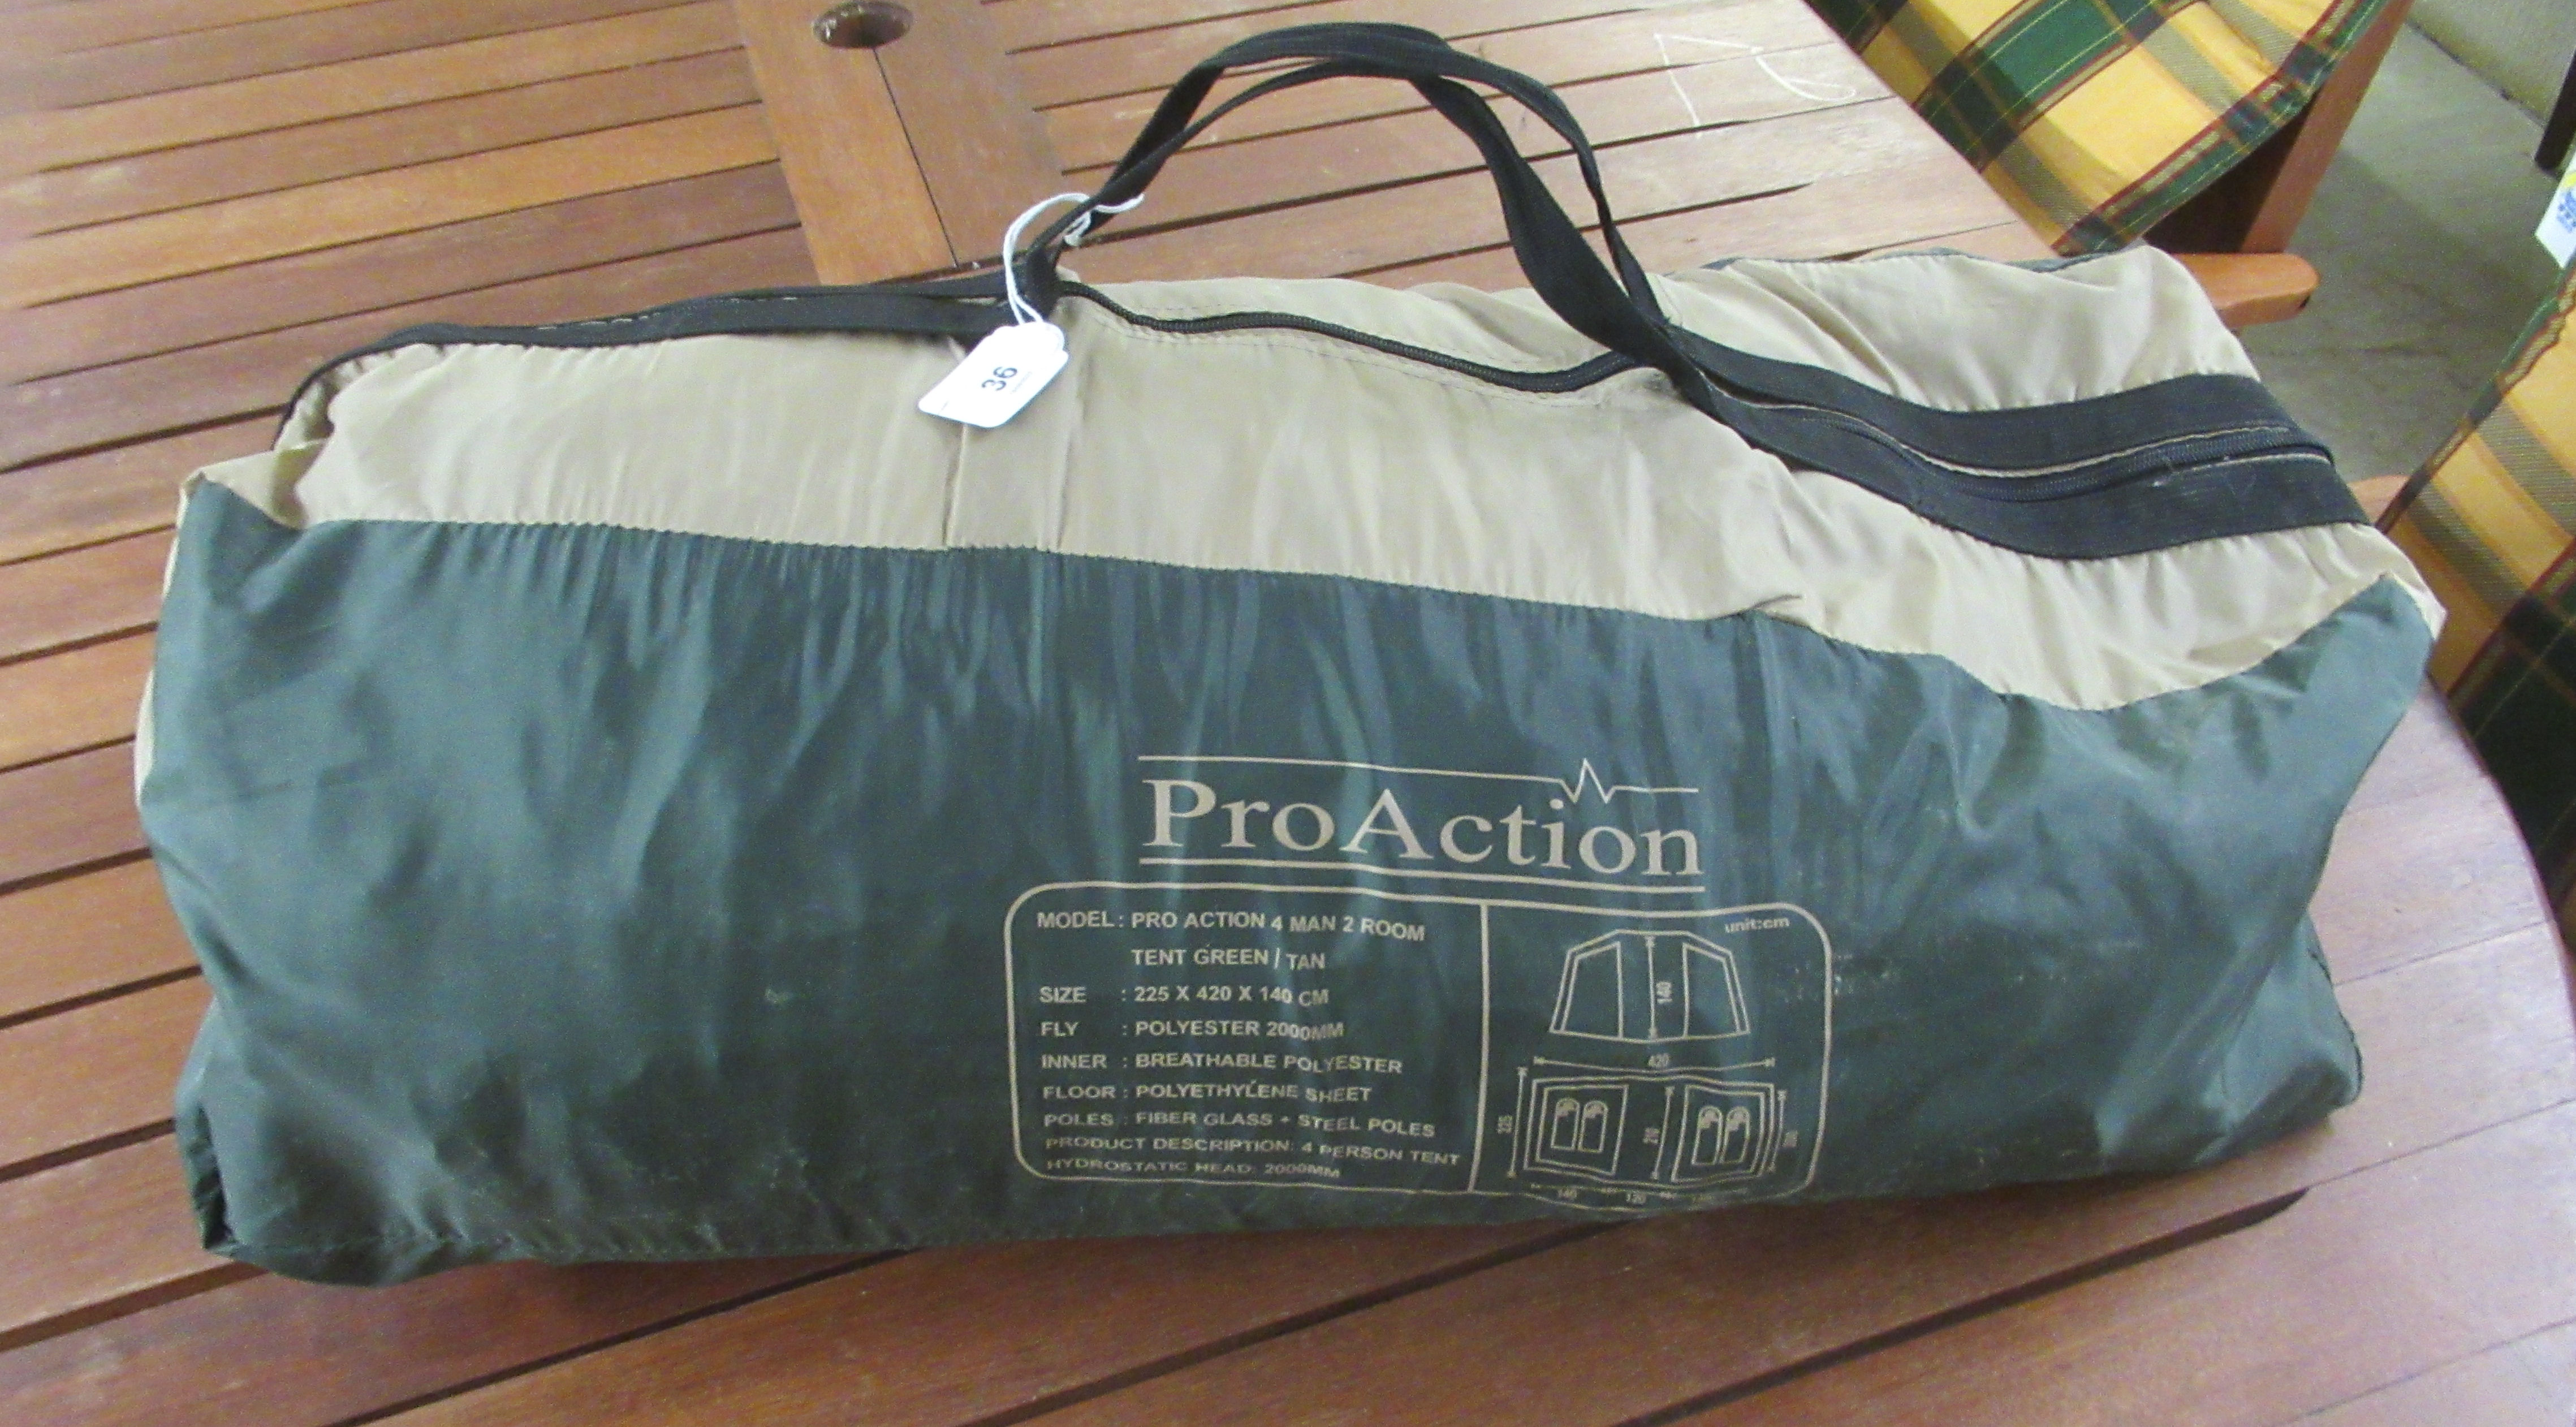 A Pro Action two man, two room tent, in a carrying bag